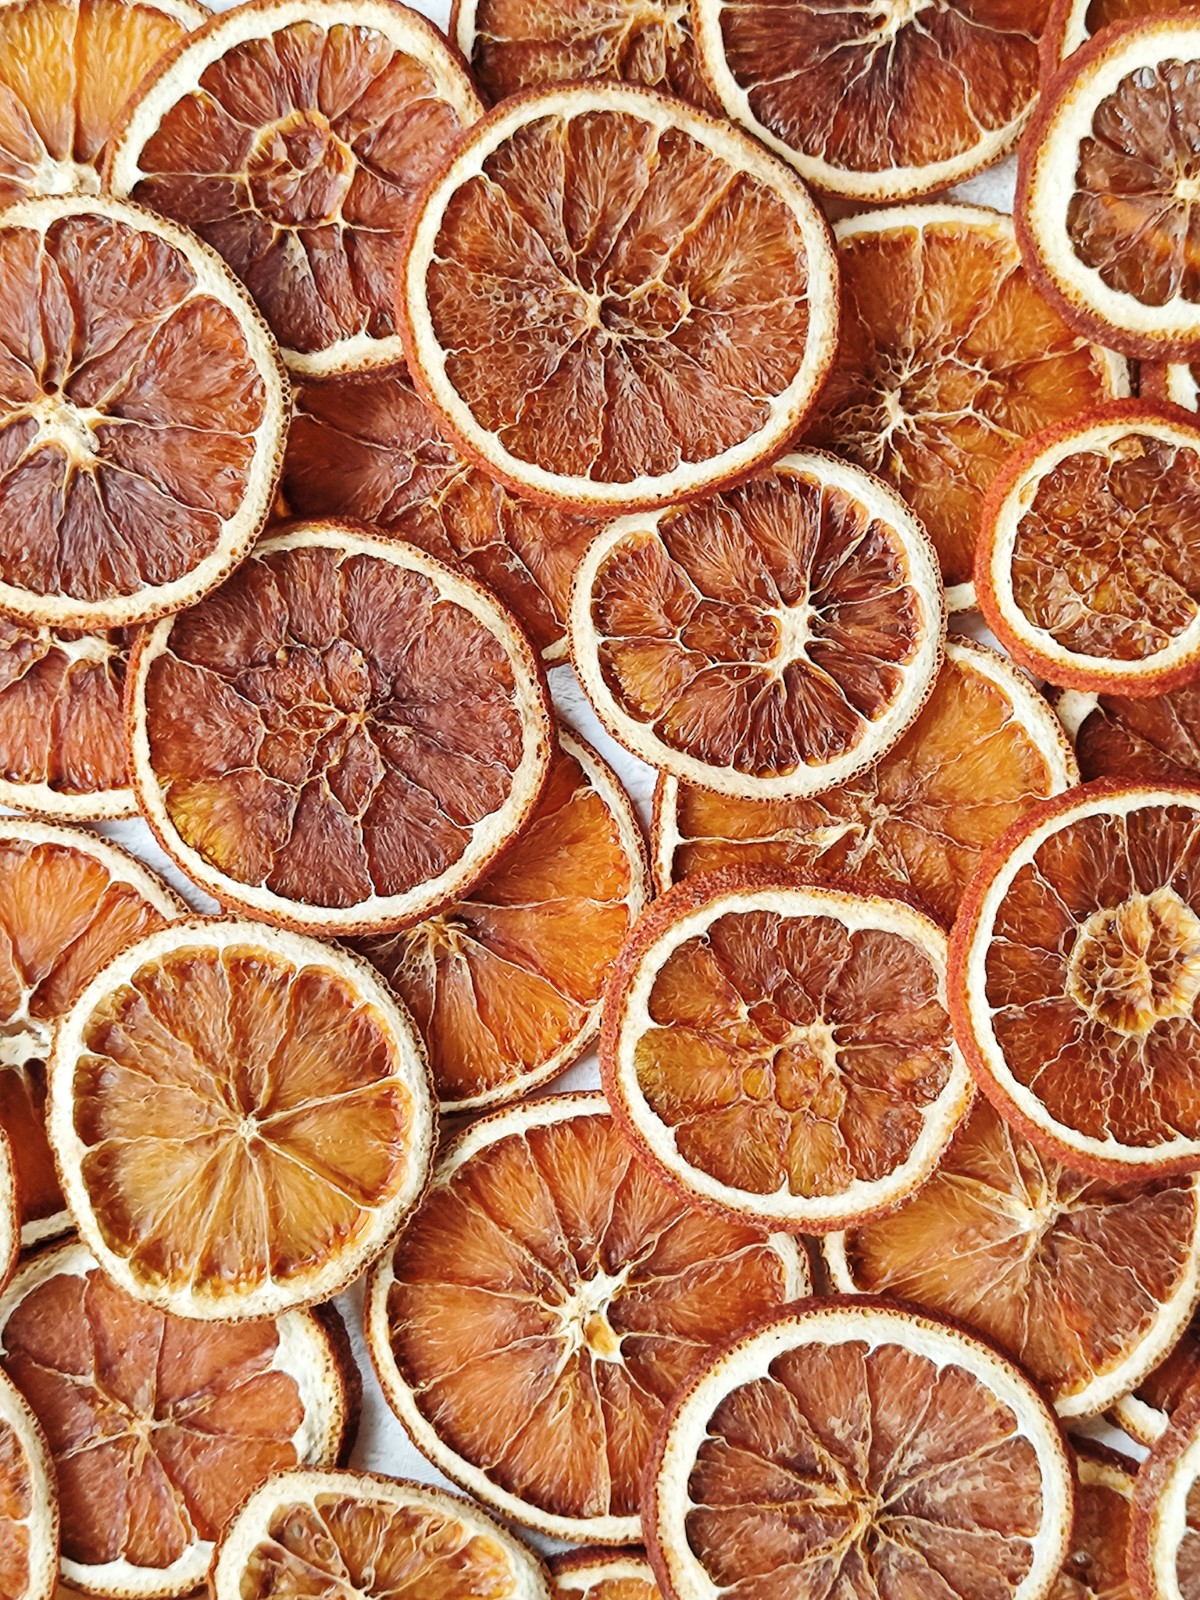 dehydrated citrus